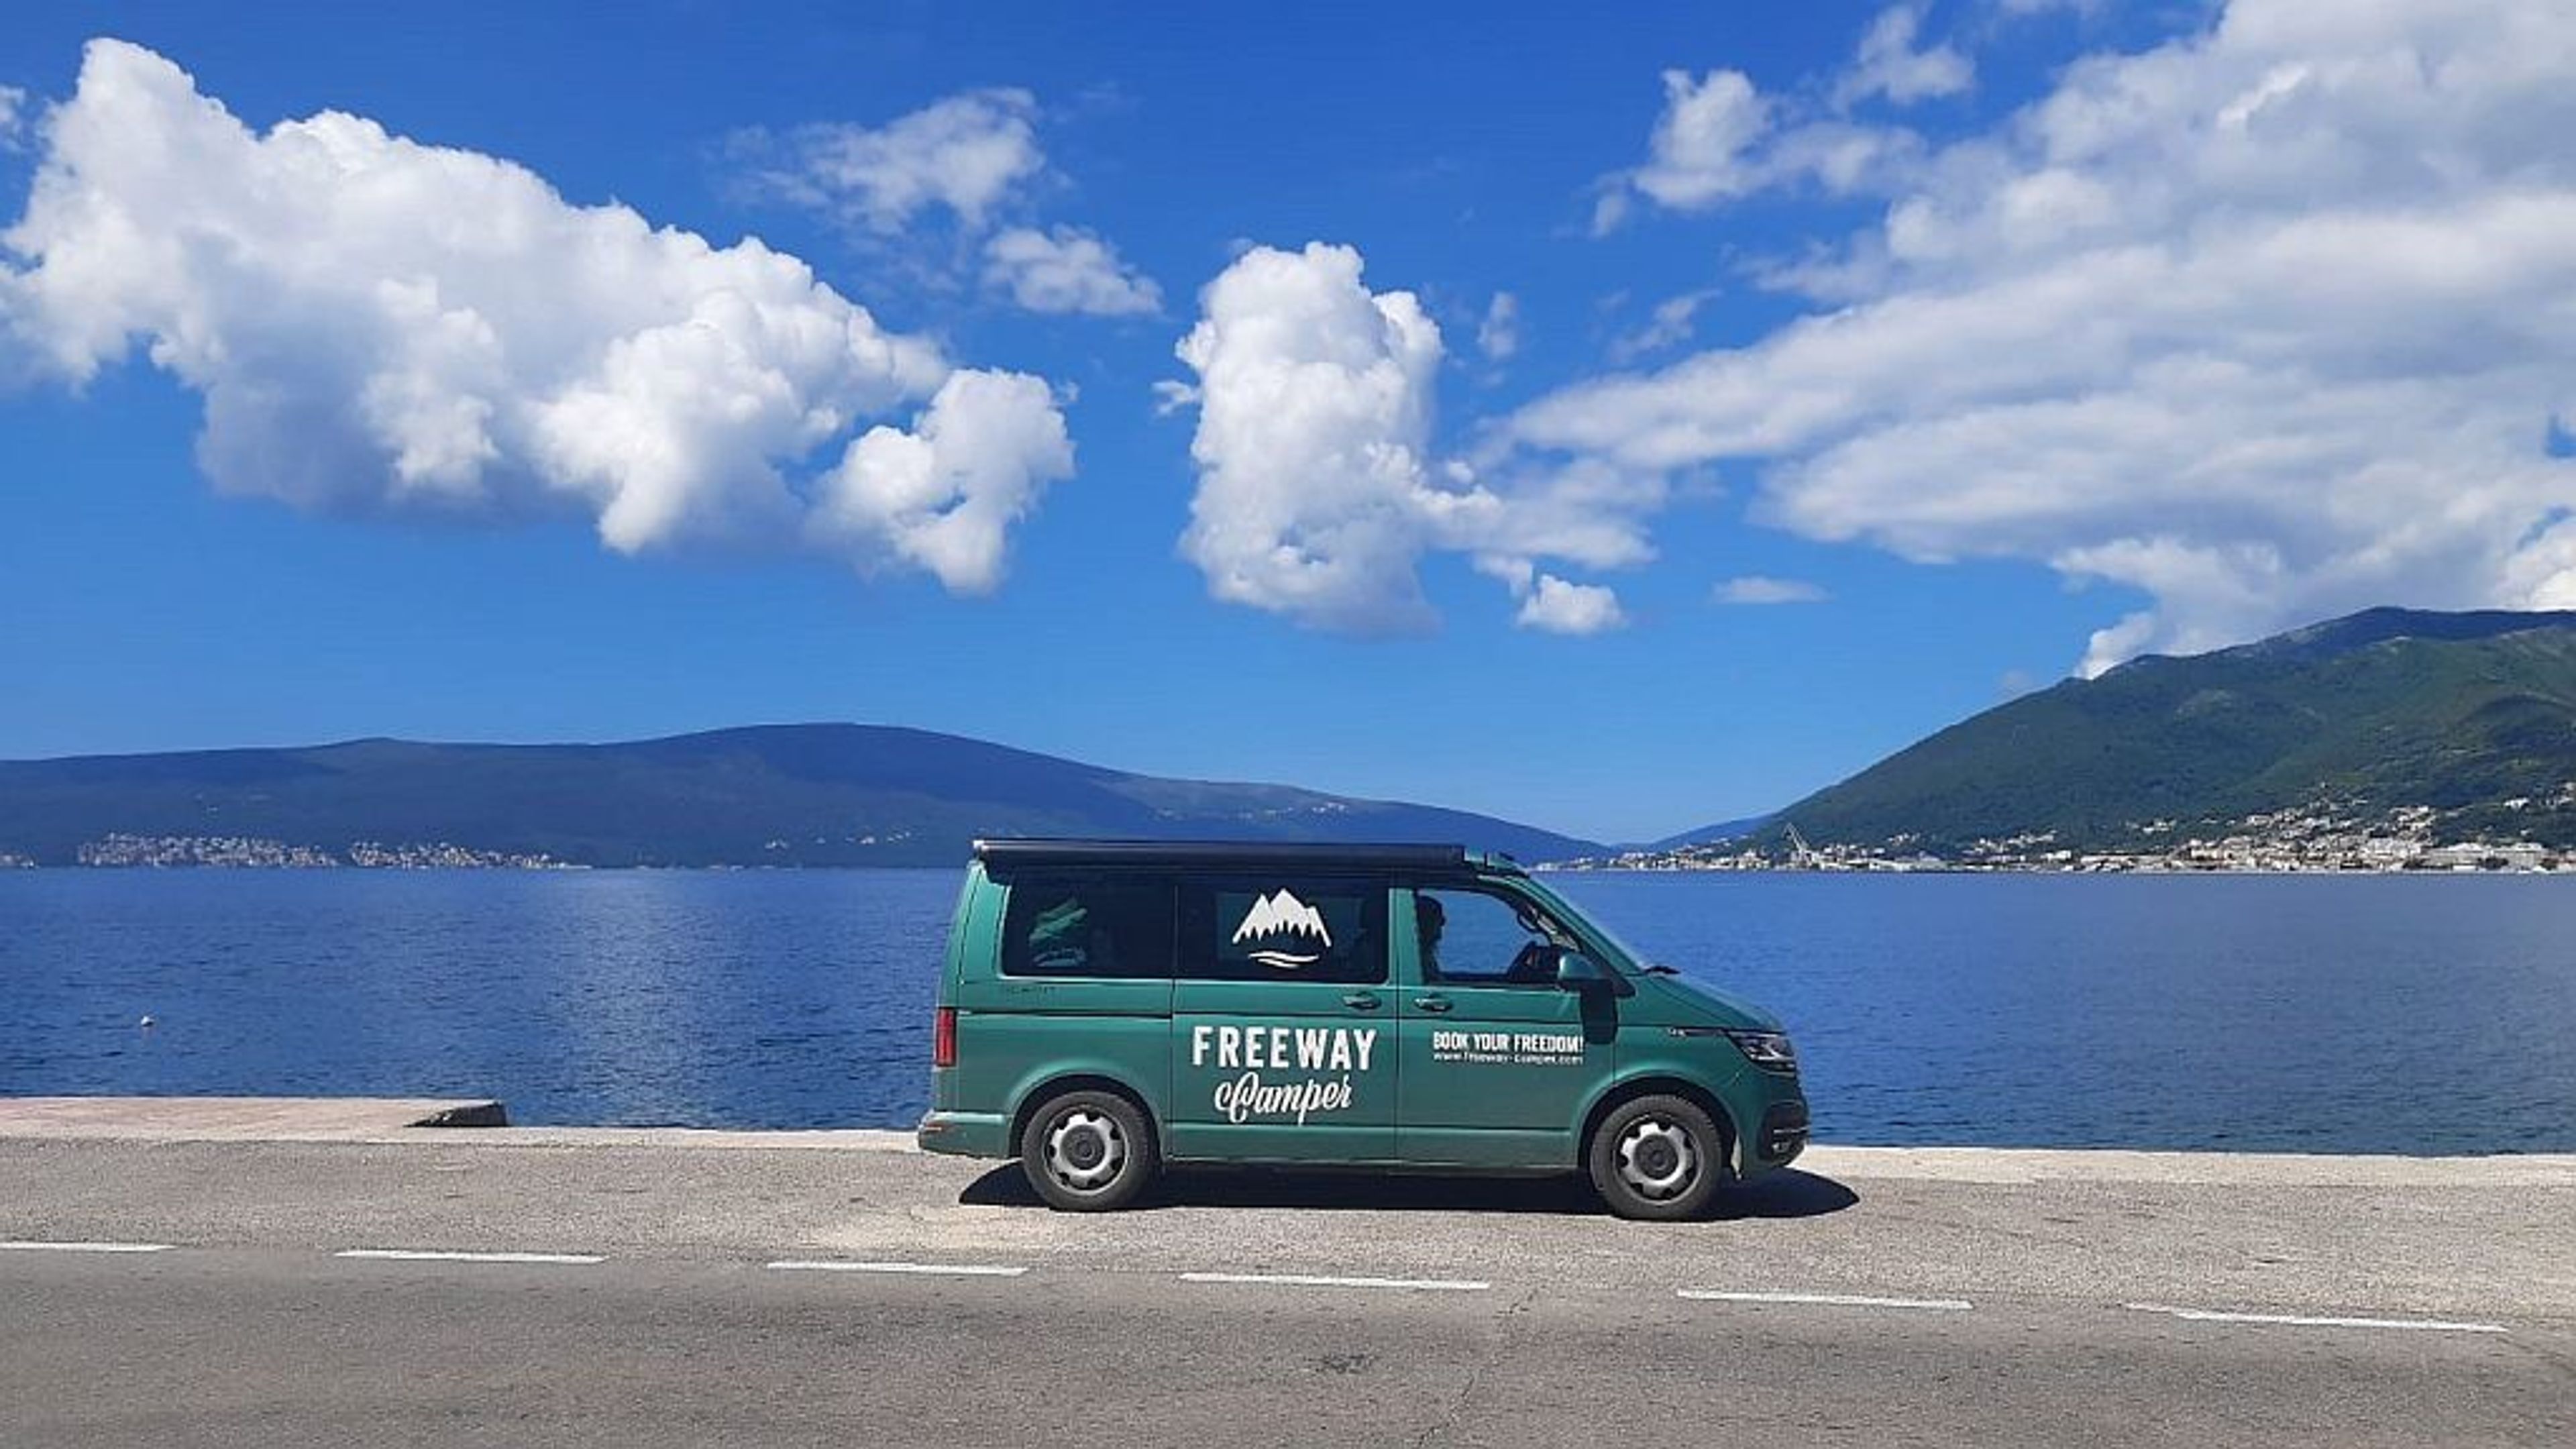 With the camper through Albania